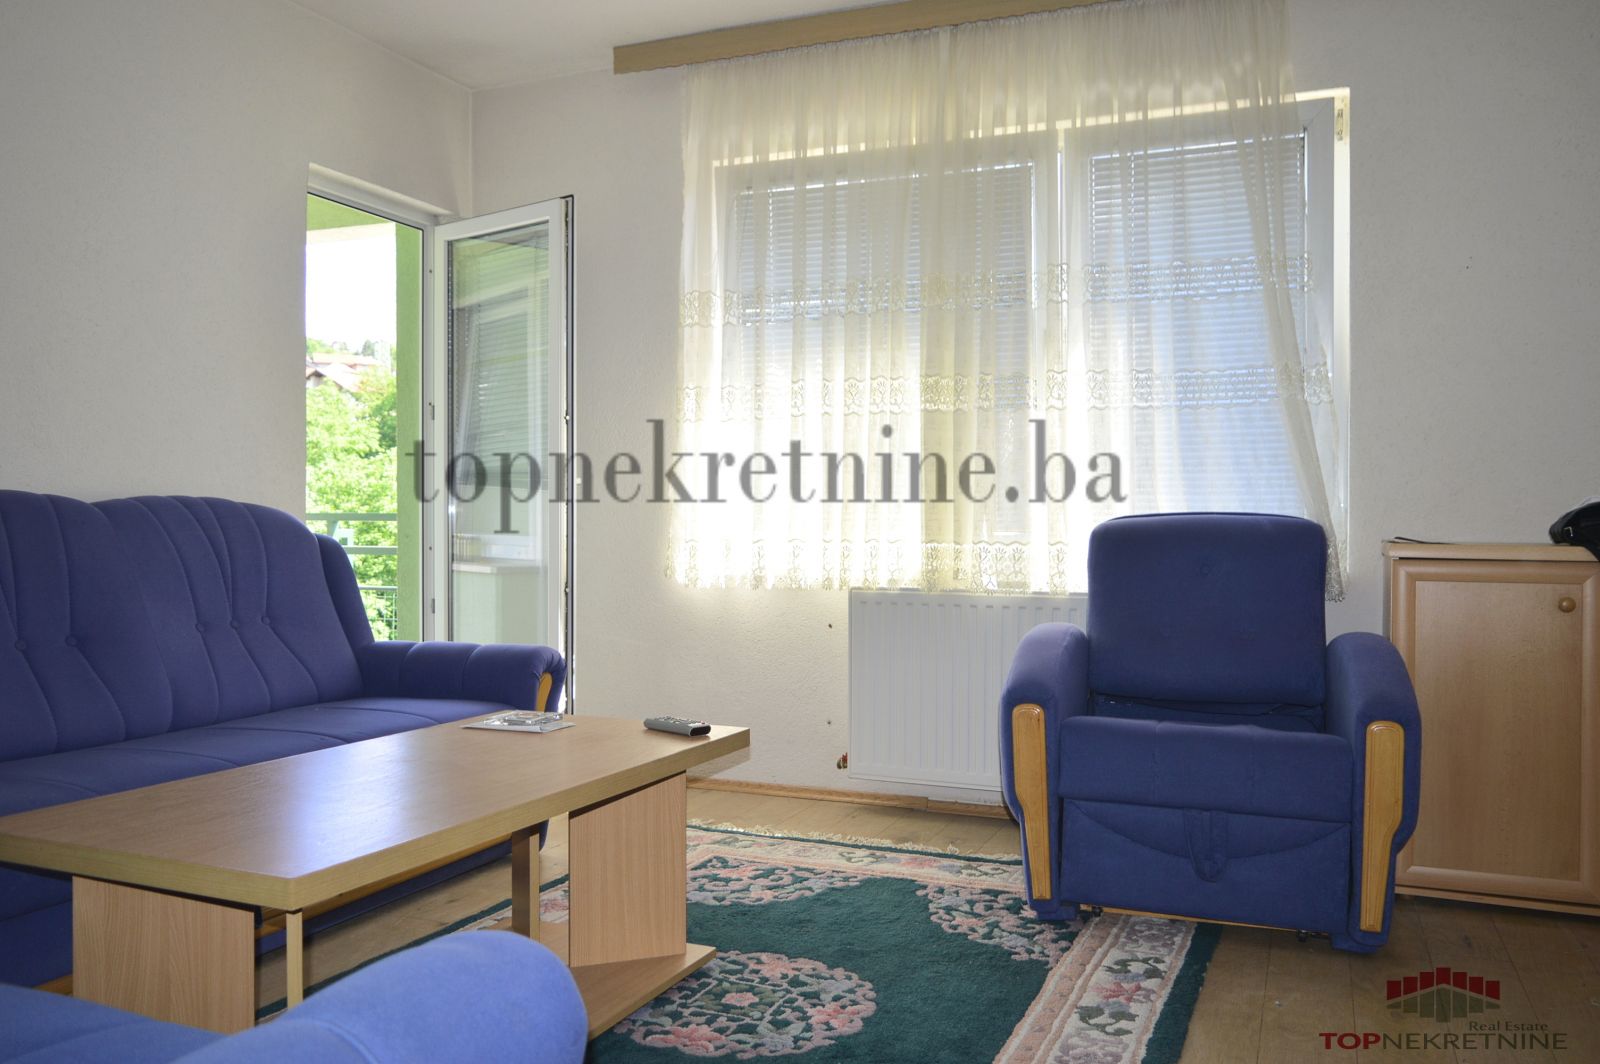 Furnished 1BDR apartment, 60 SqM with a balcony, 1st floor, Velesici